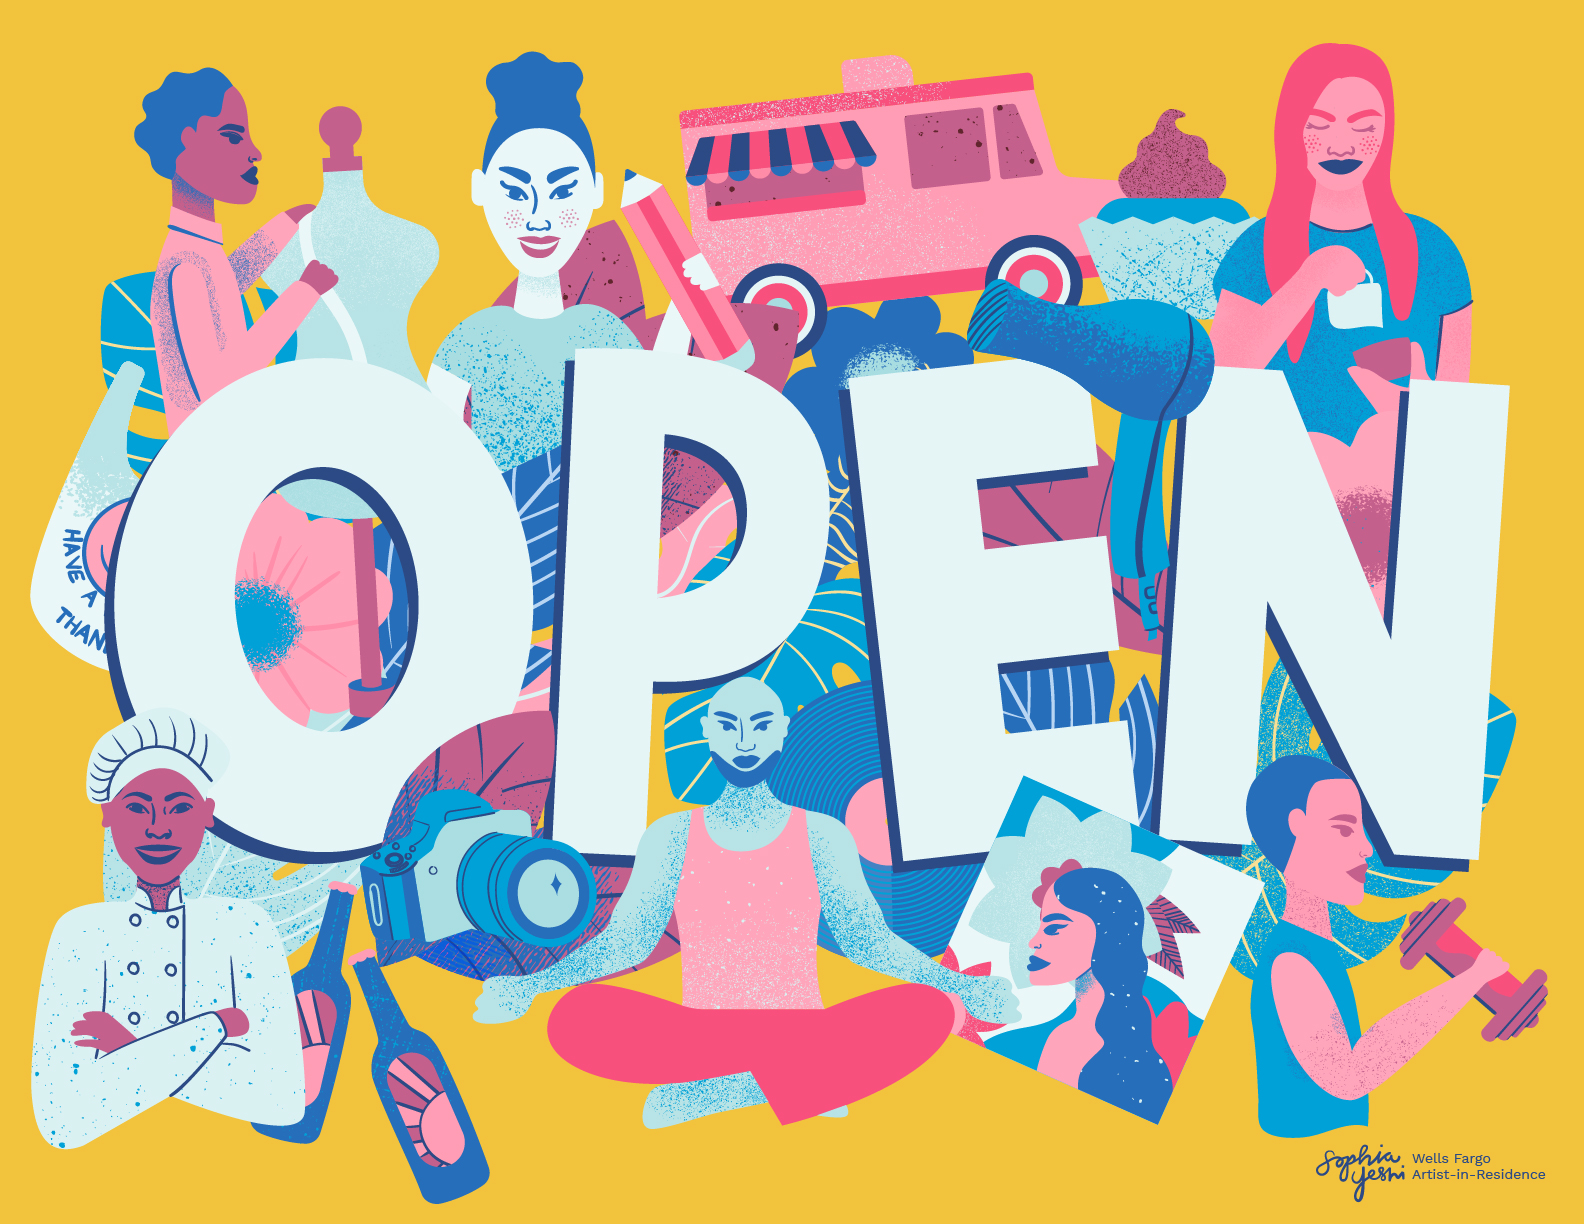 Meet The Artist Reimagining “Open” Signs For Small Businesses